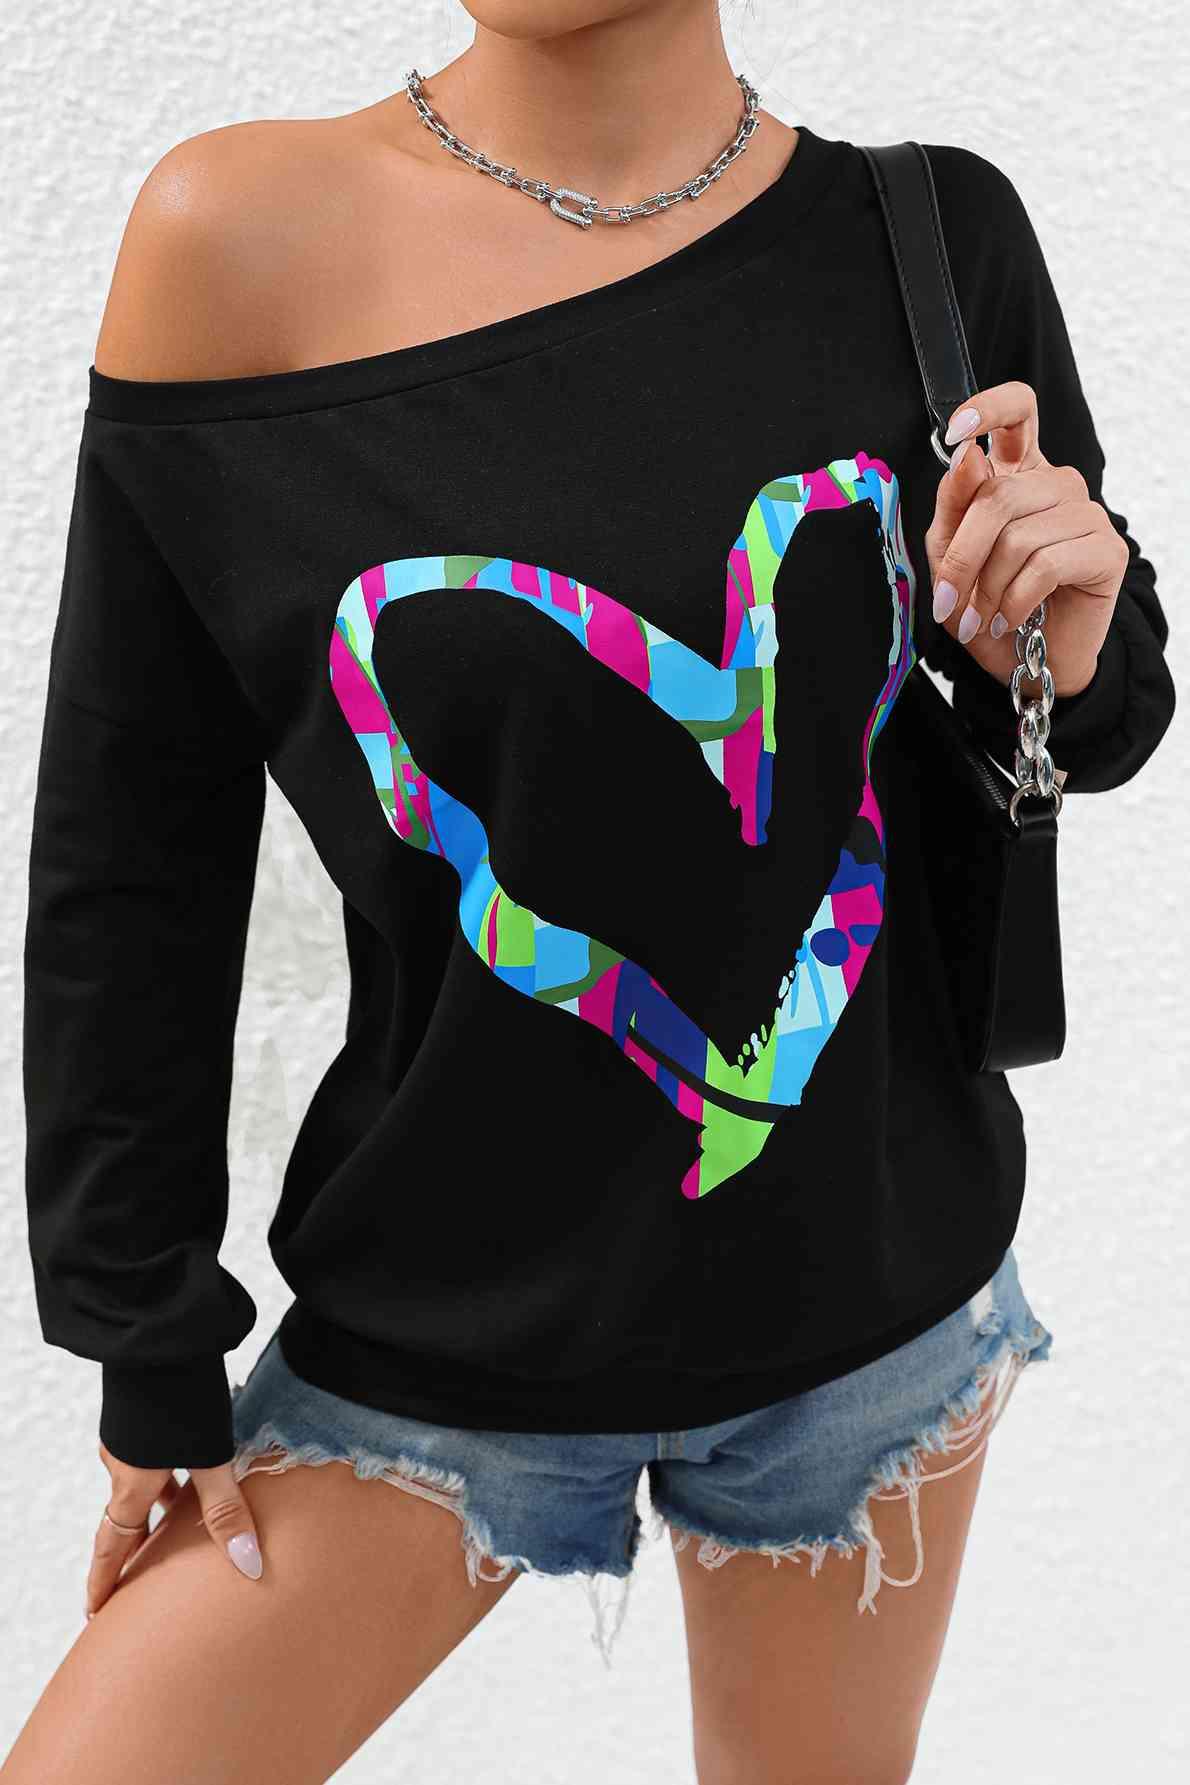 a woman wearing a black shirt with a colorful heart on it